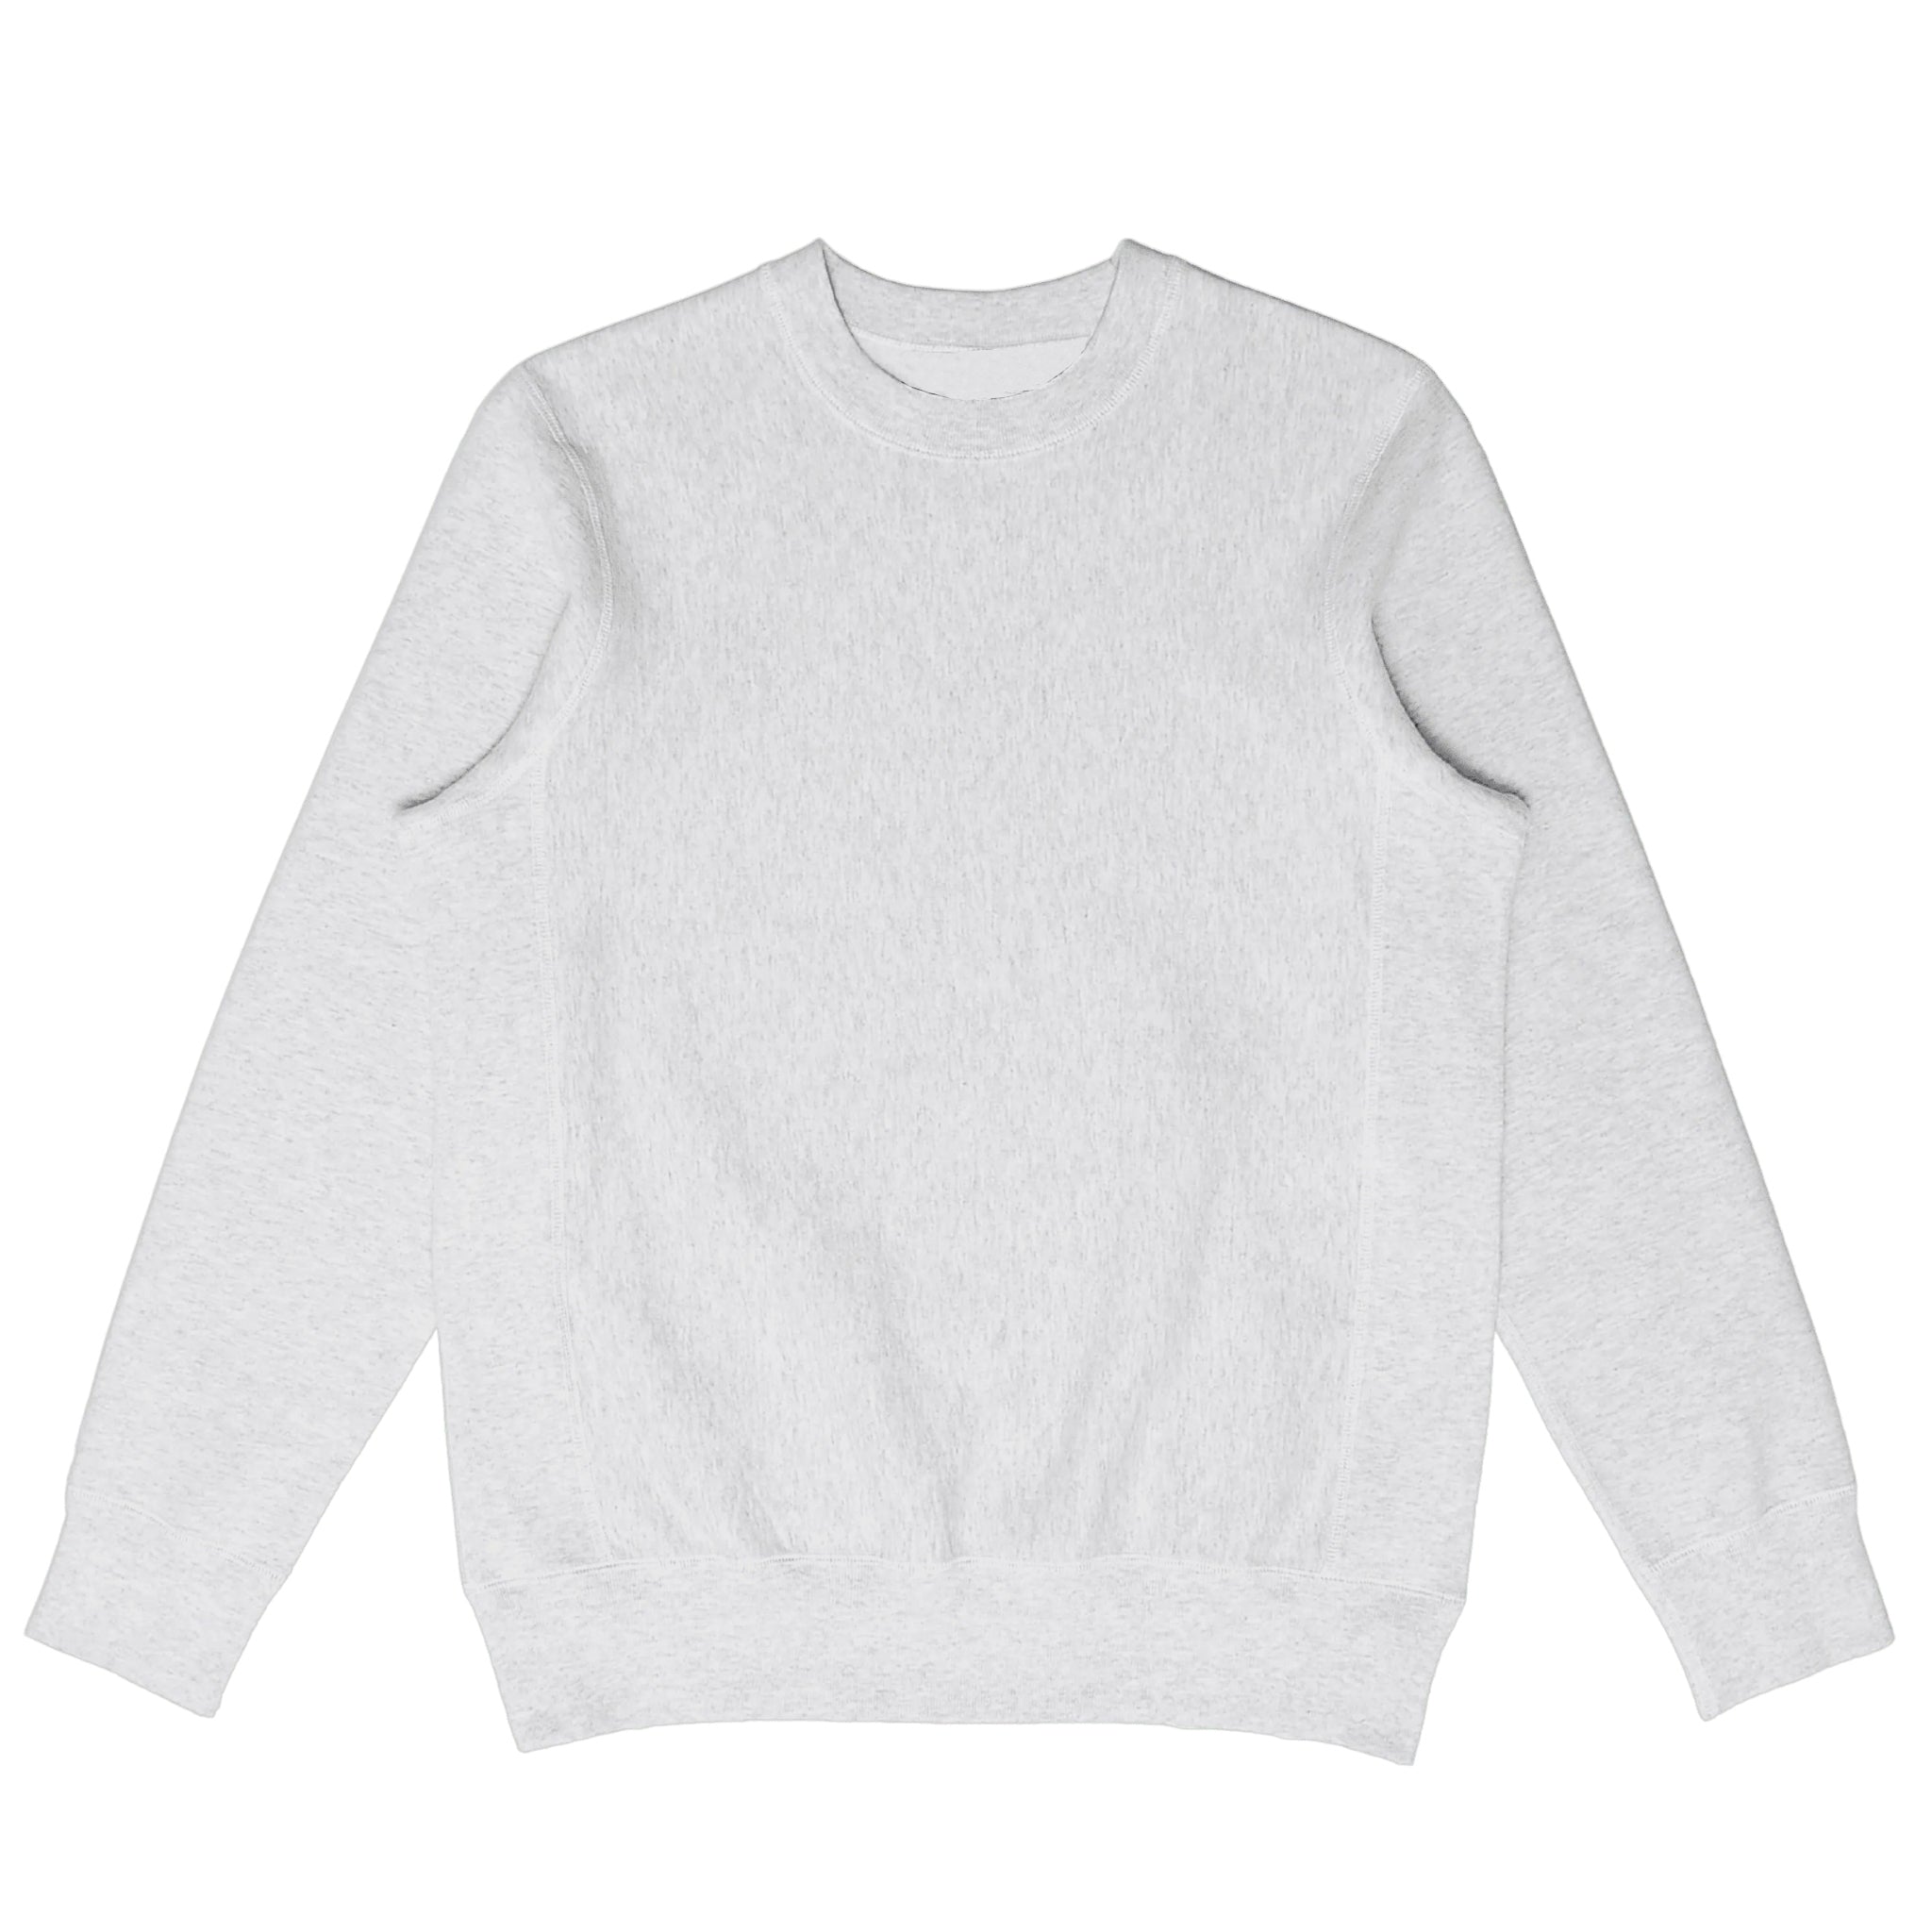 Front view of light grey heavyweight knit crewneck in 100% cotton